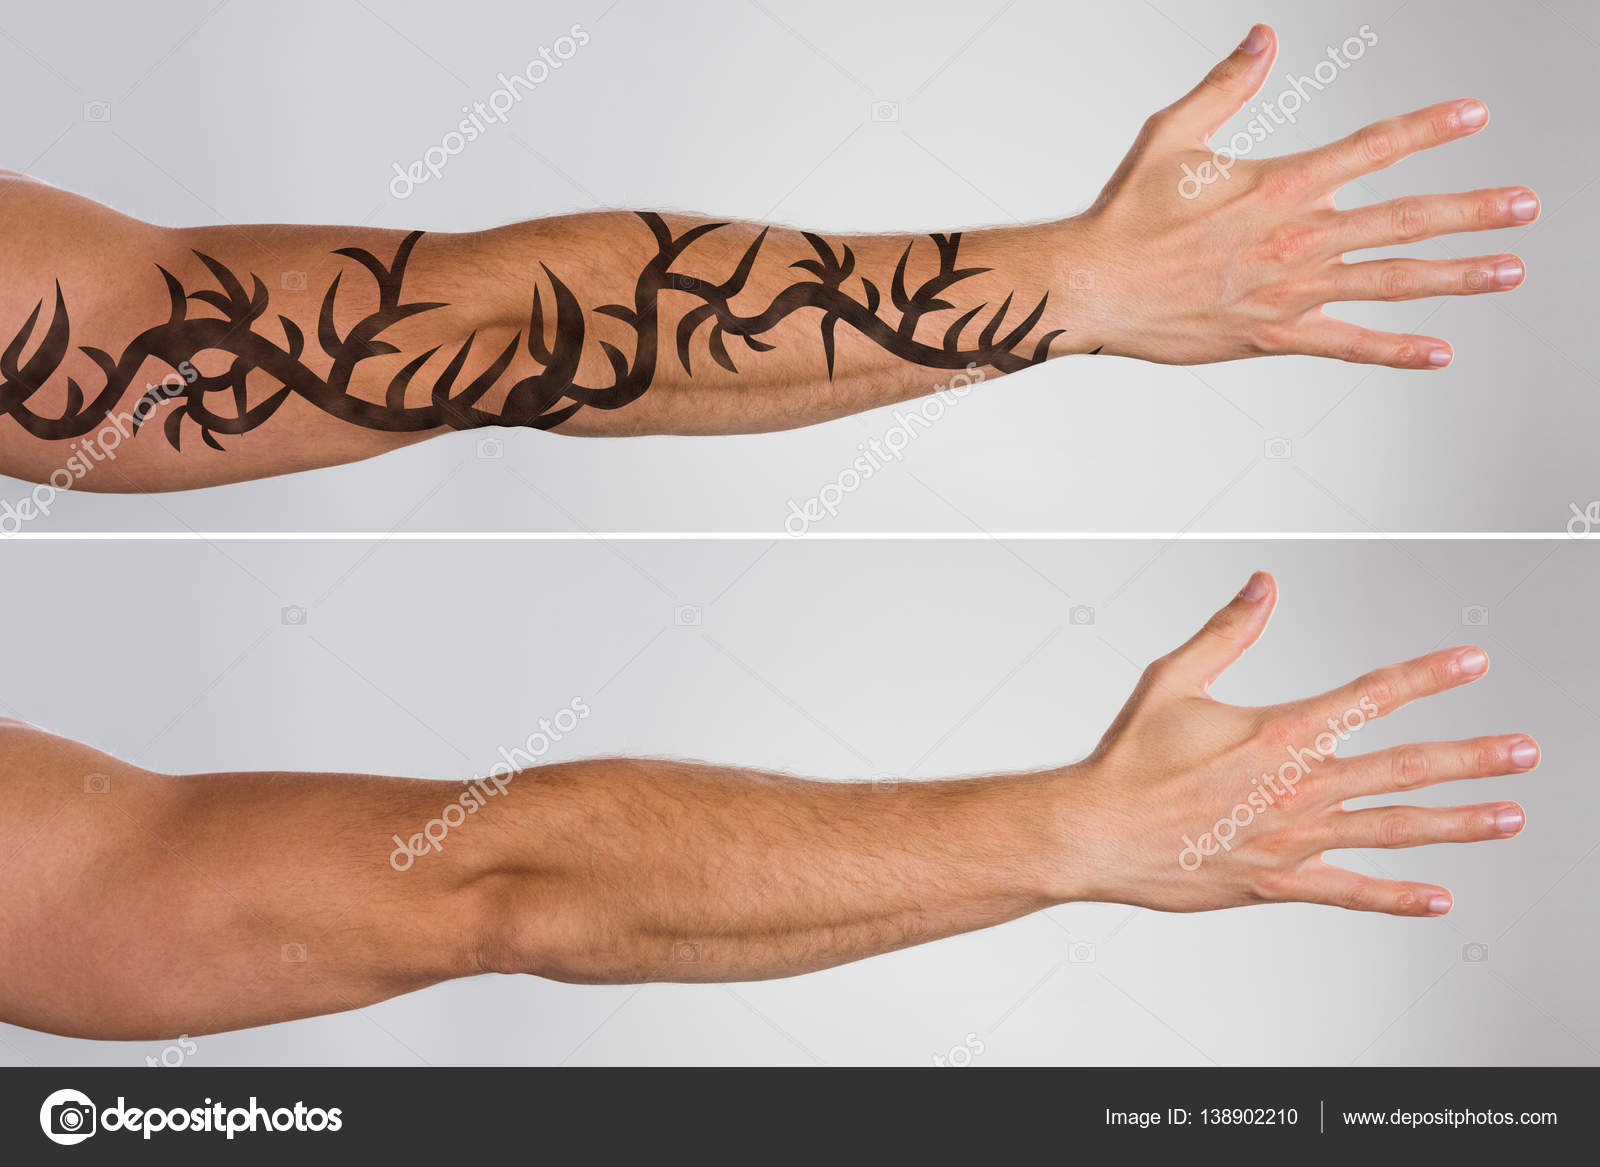 1. Laser Tattoo Removal - wide 3